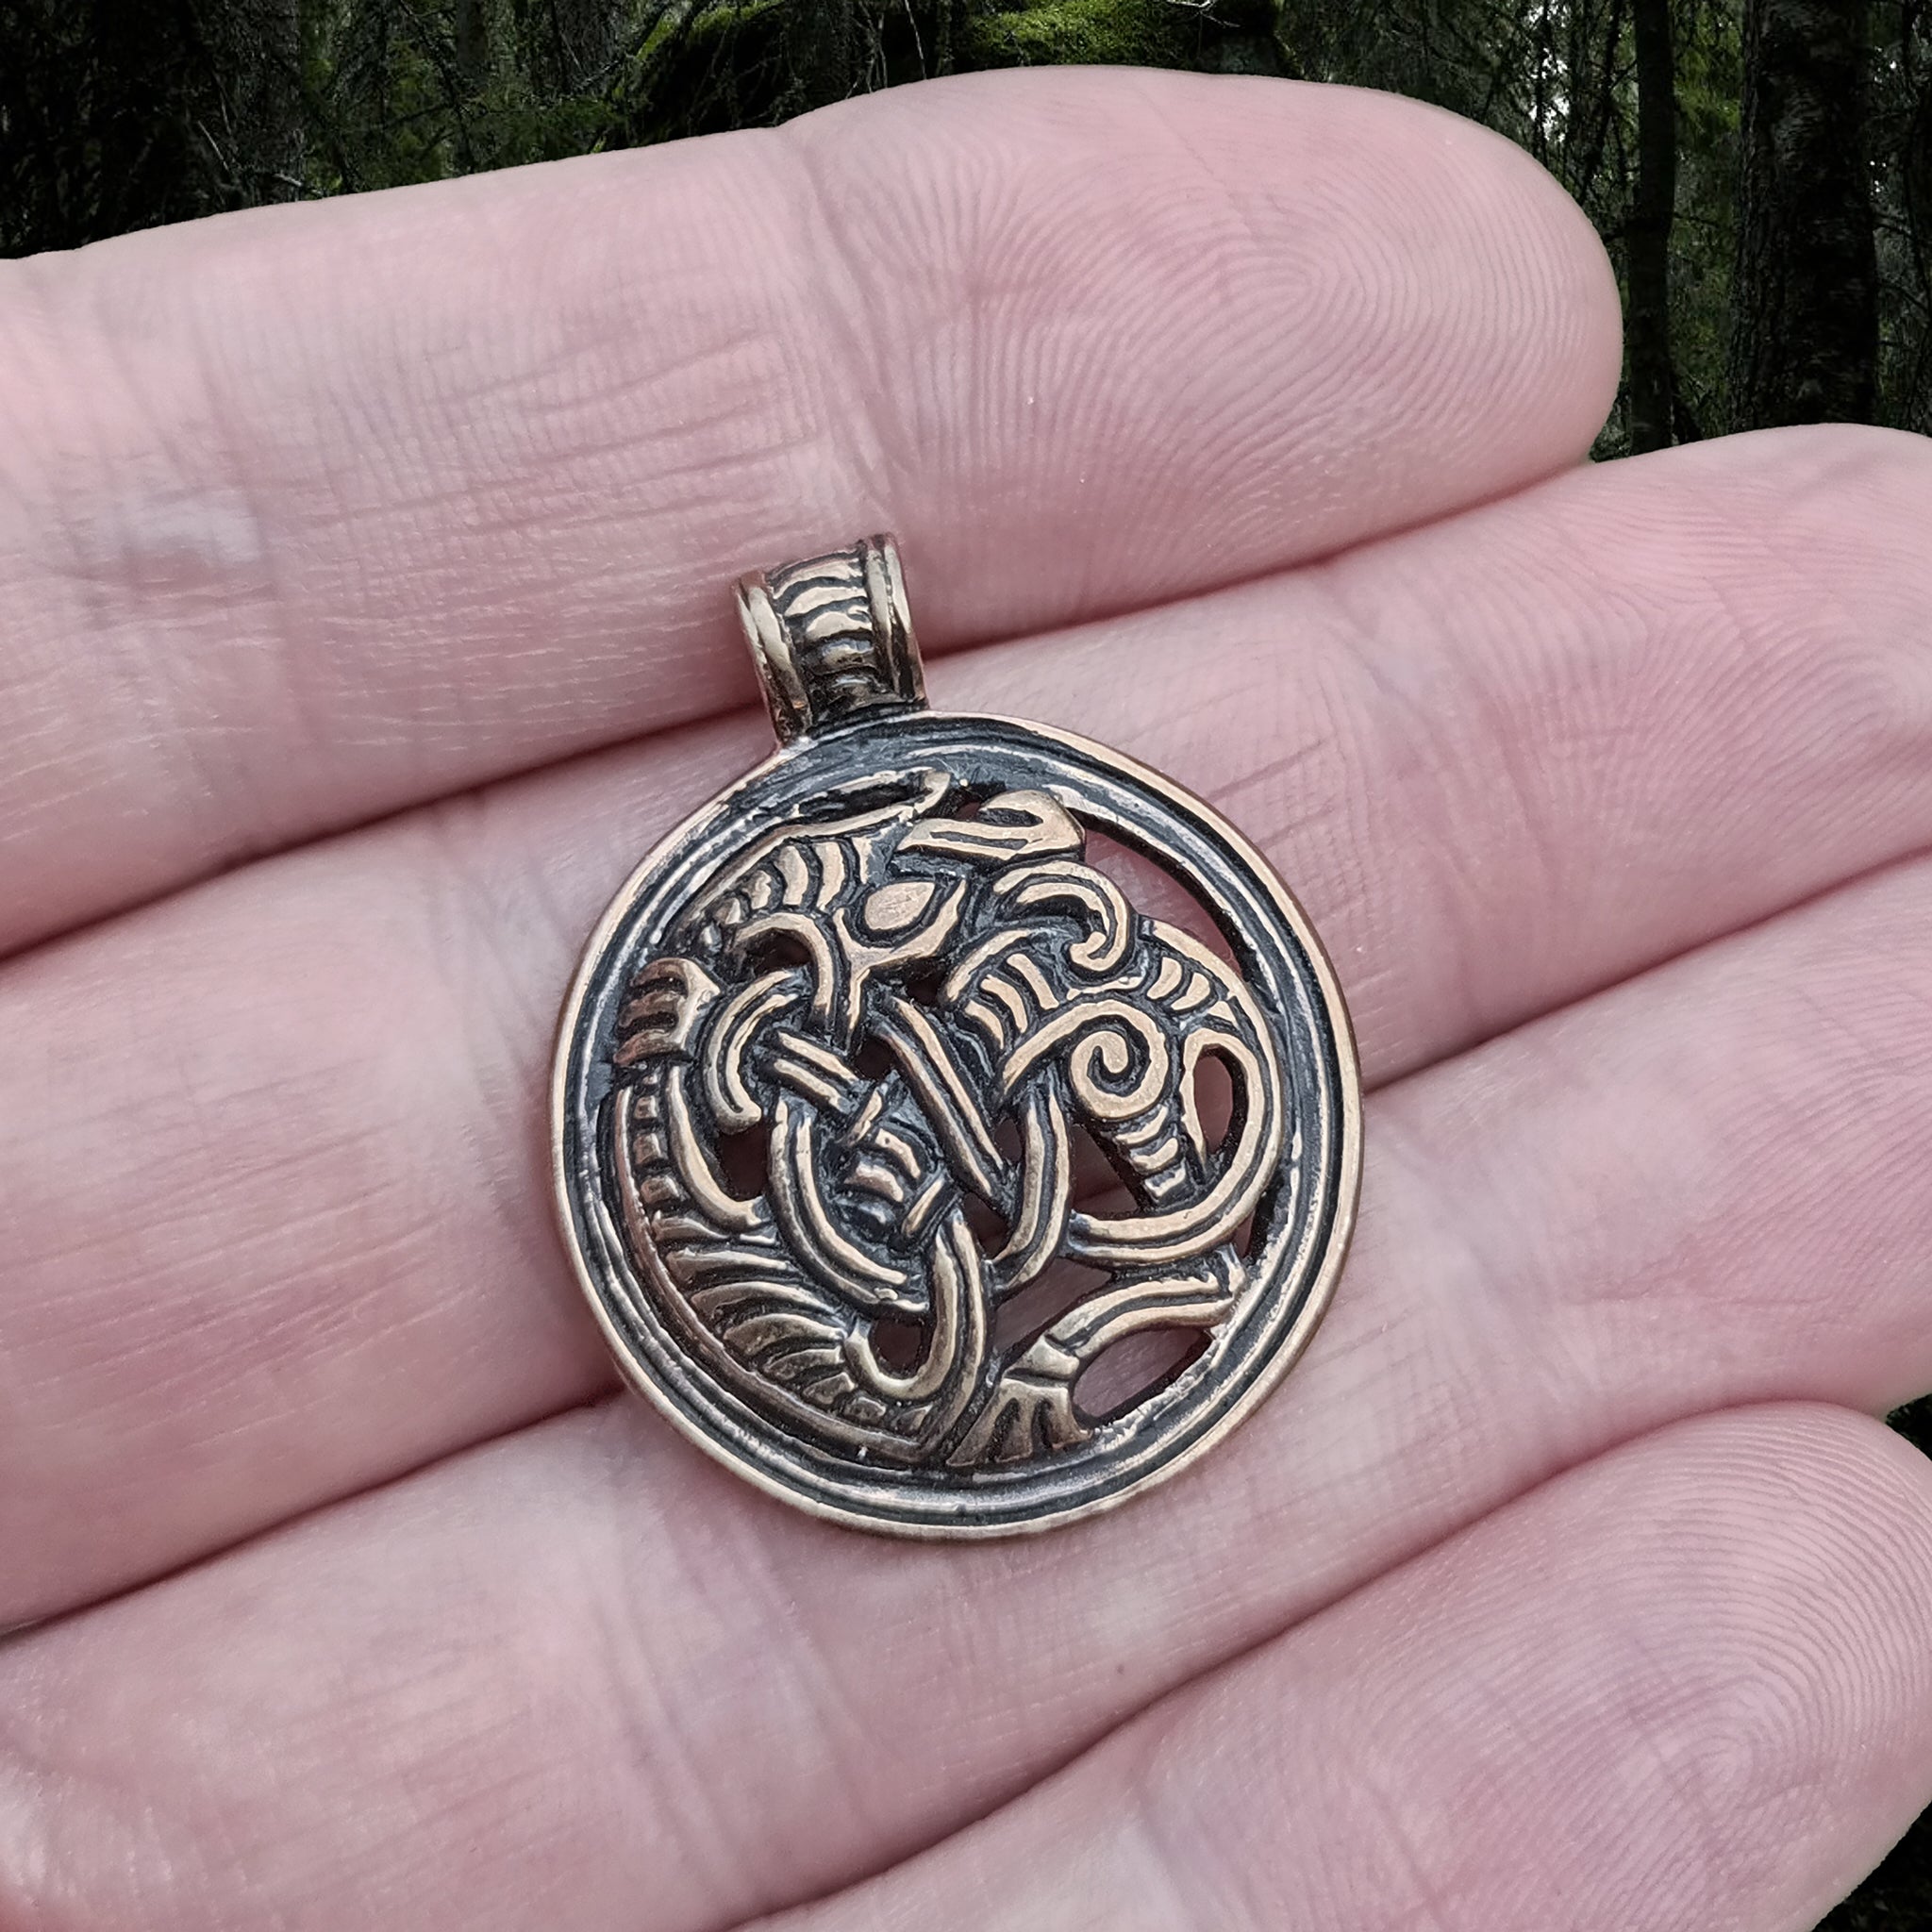 Round Dragon Beast Pendant in Bronze on Hand - Viking Jewelry from The Viking Dragon